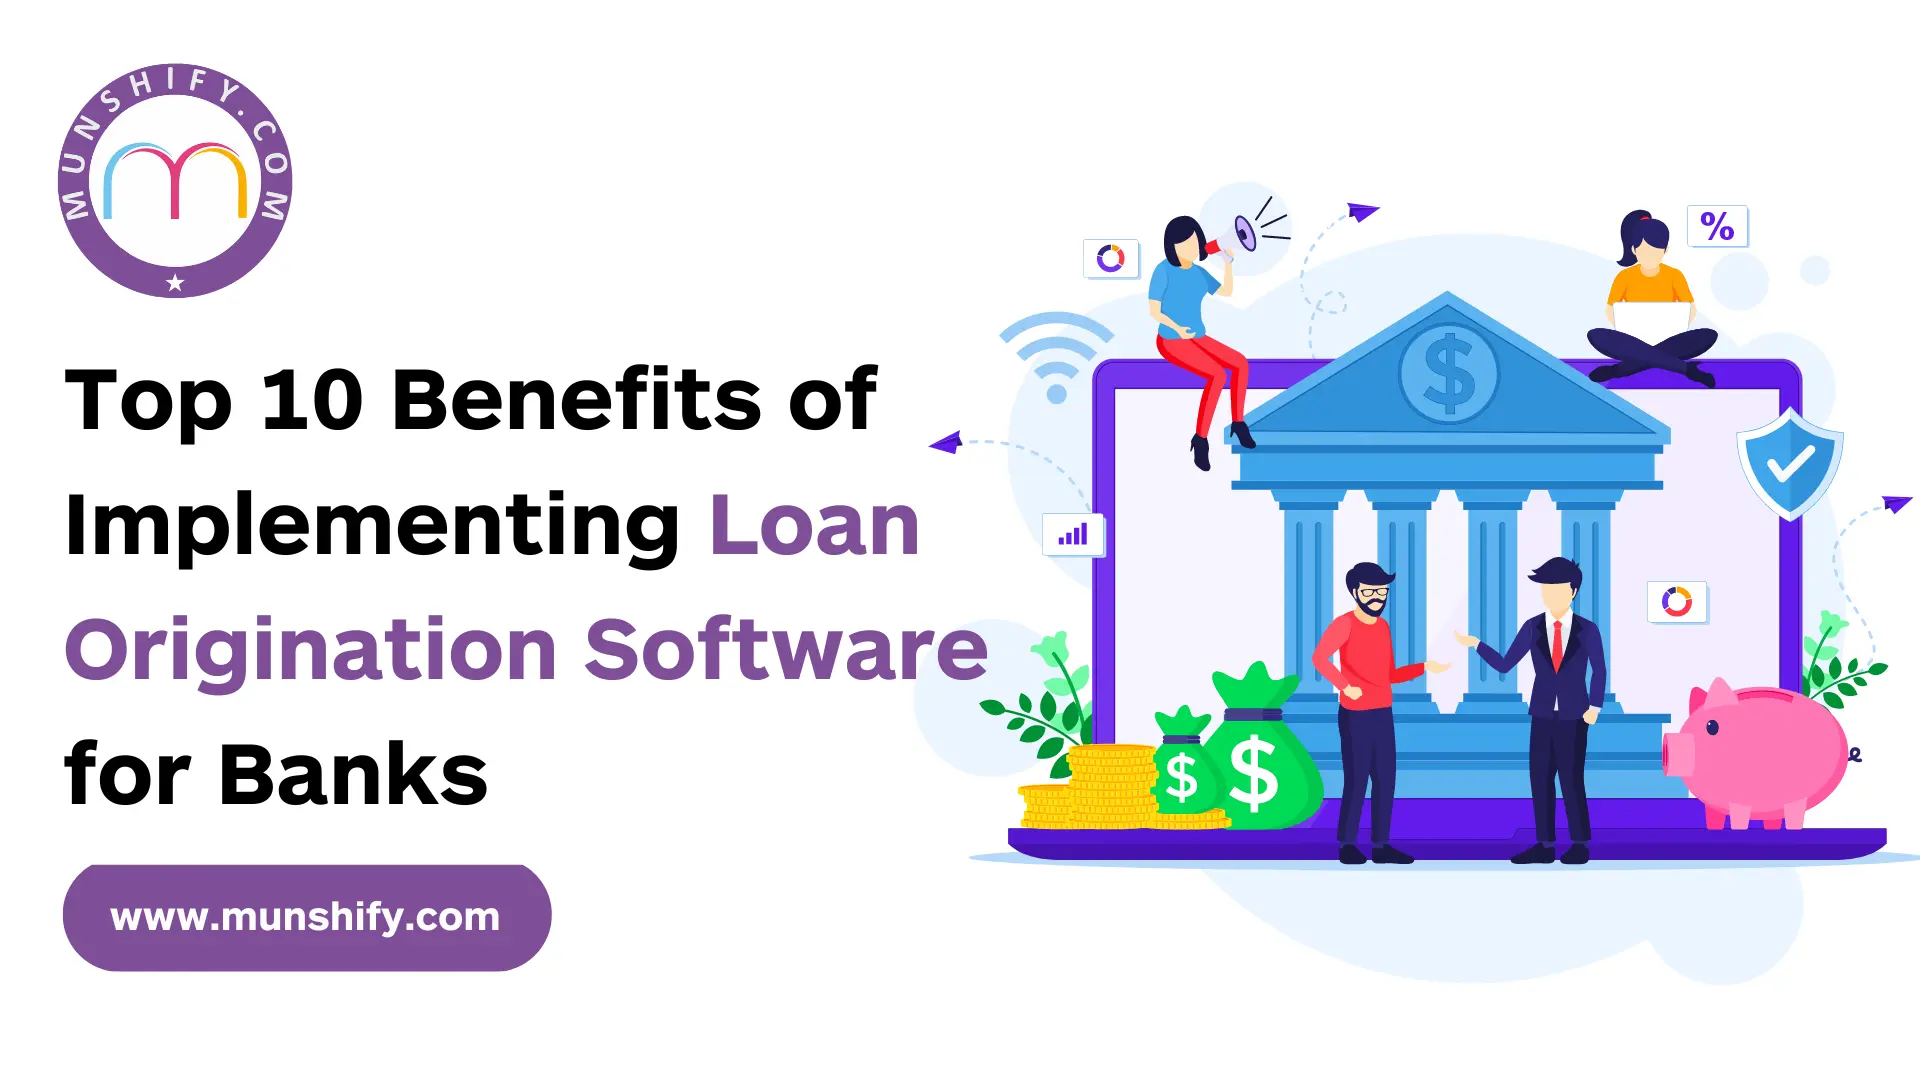 Top 10 Benefits of Implementing Loan Origination Software for Banks